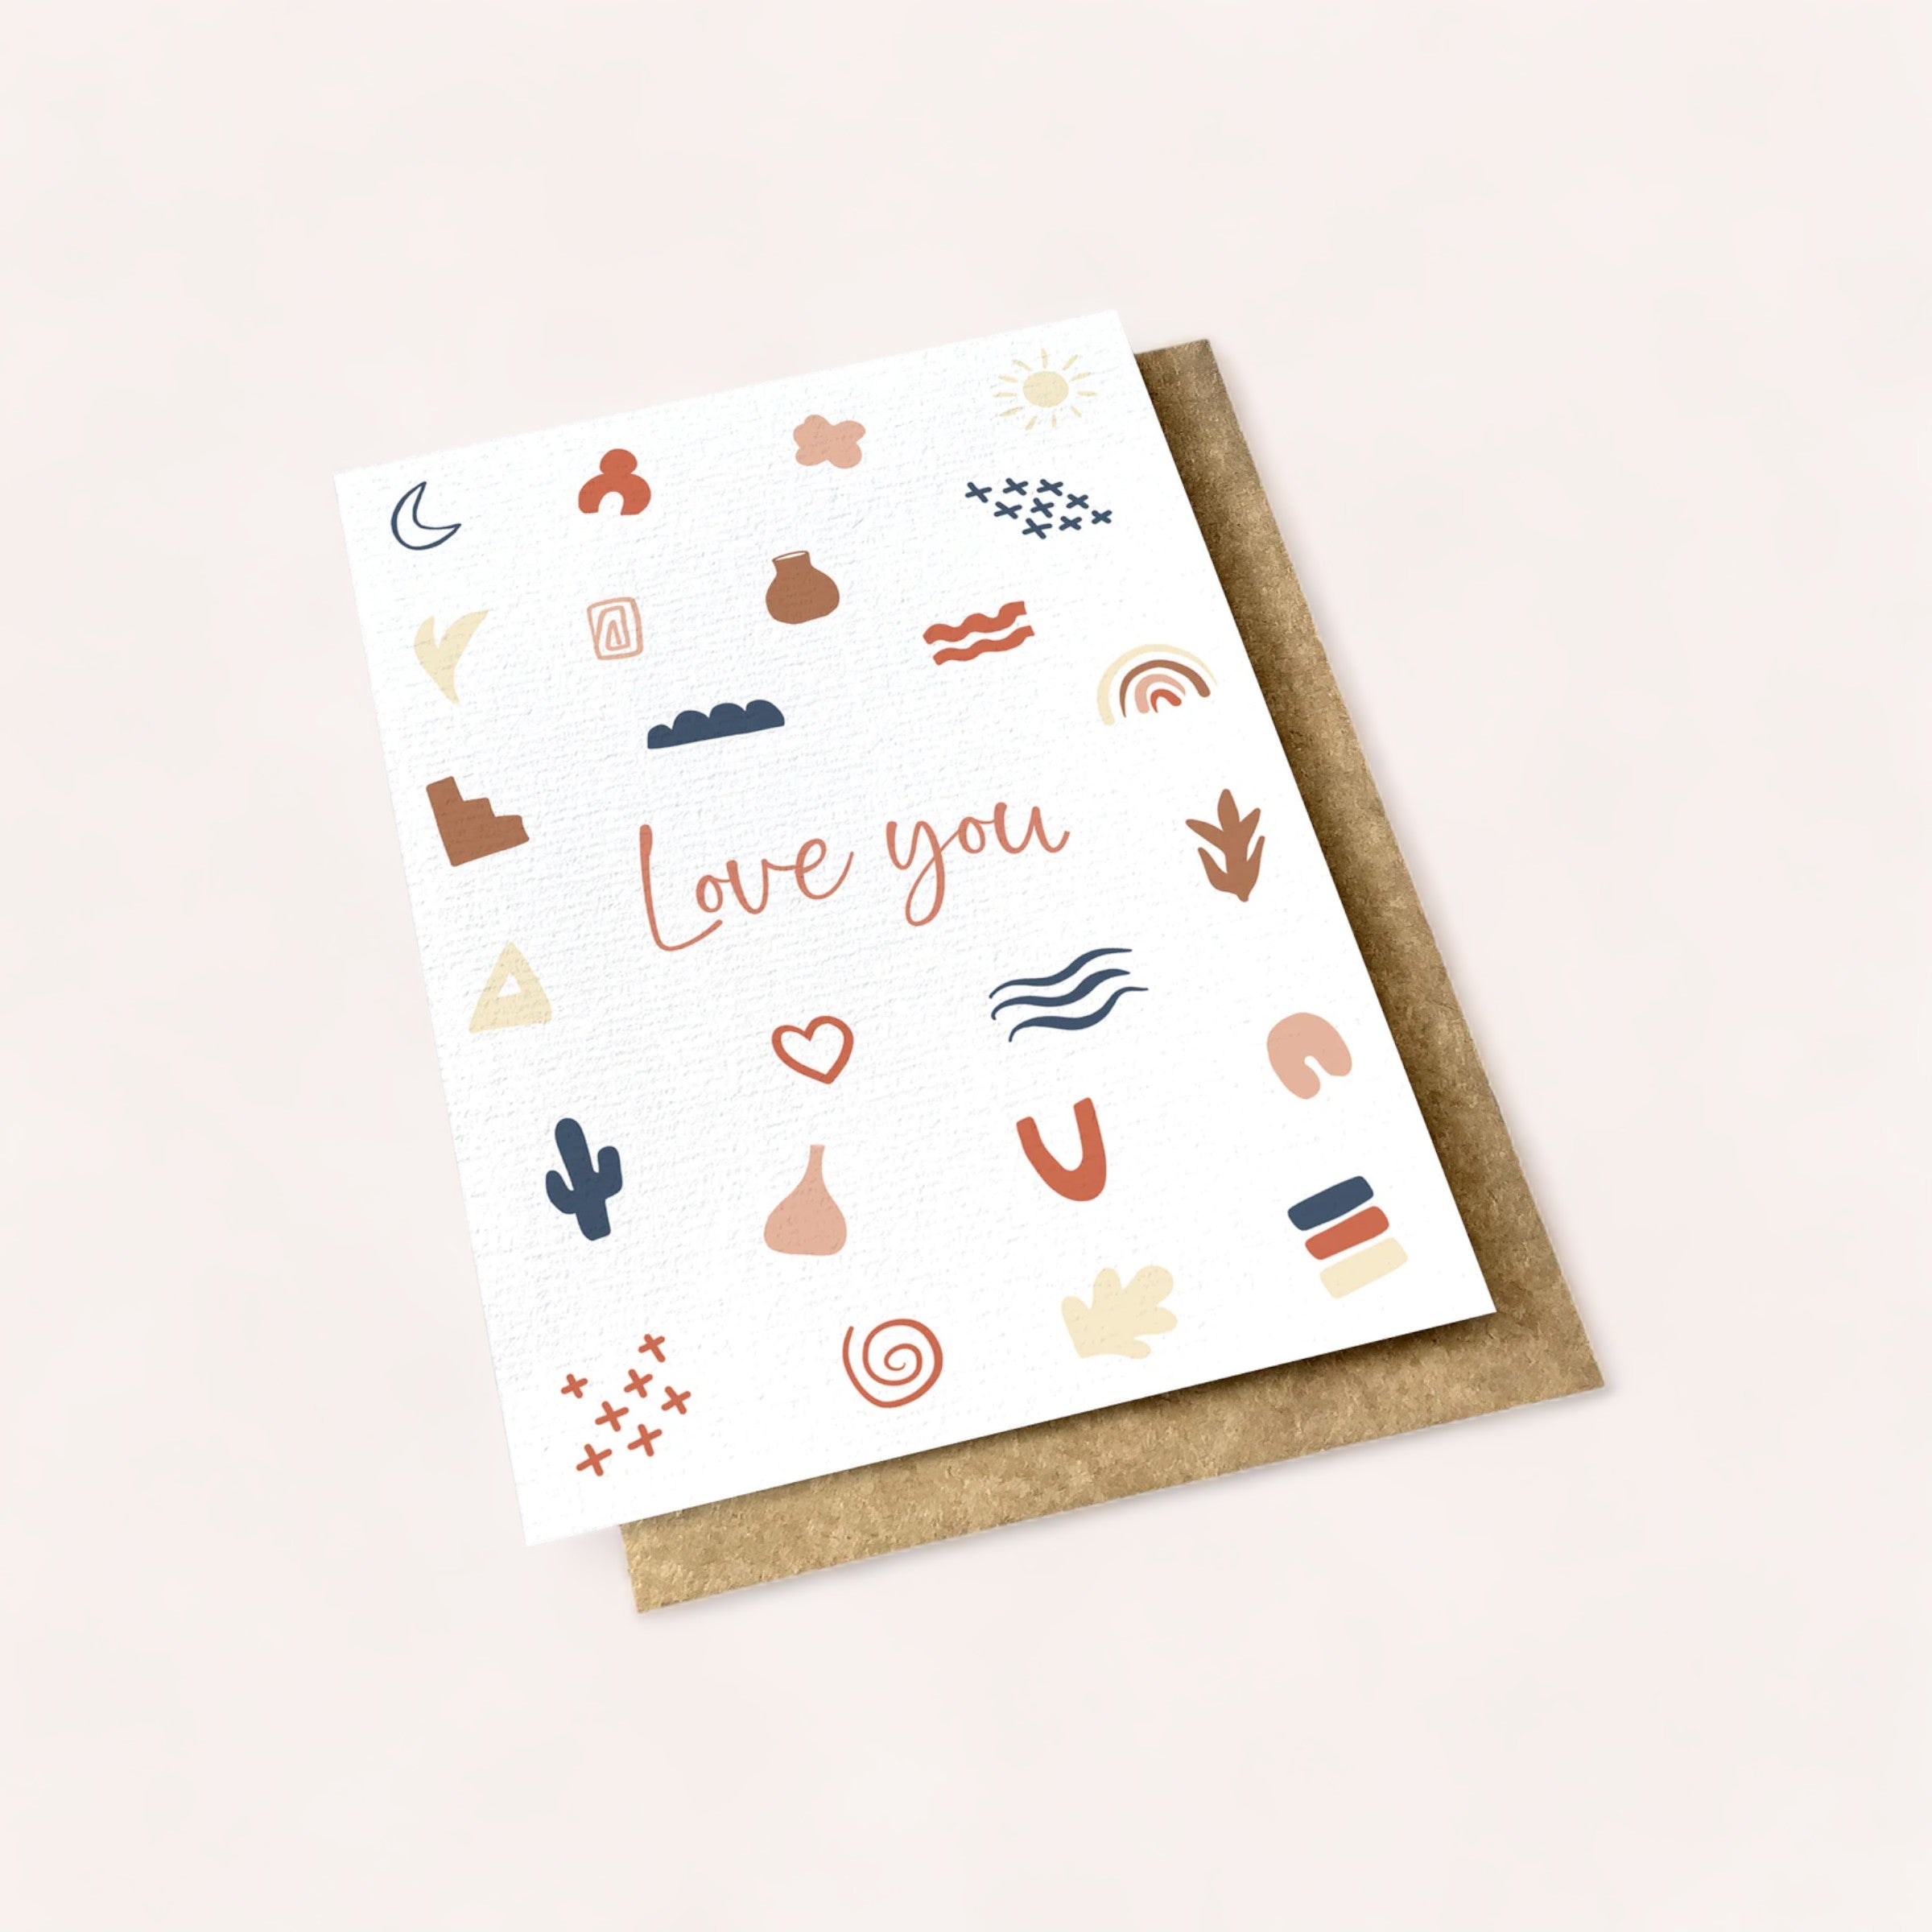 A delicate and artistic Ink Bomb Love You Card, part of a multibuy collection, with the phrase "love you" surrounded by various whimsical symbols and shapes, presented on a cream background with a natural textured.